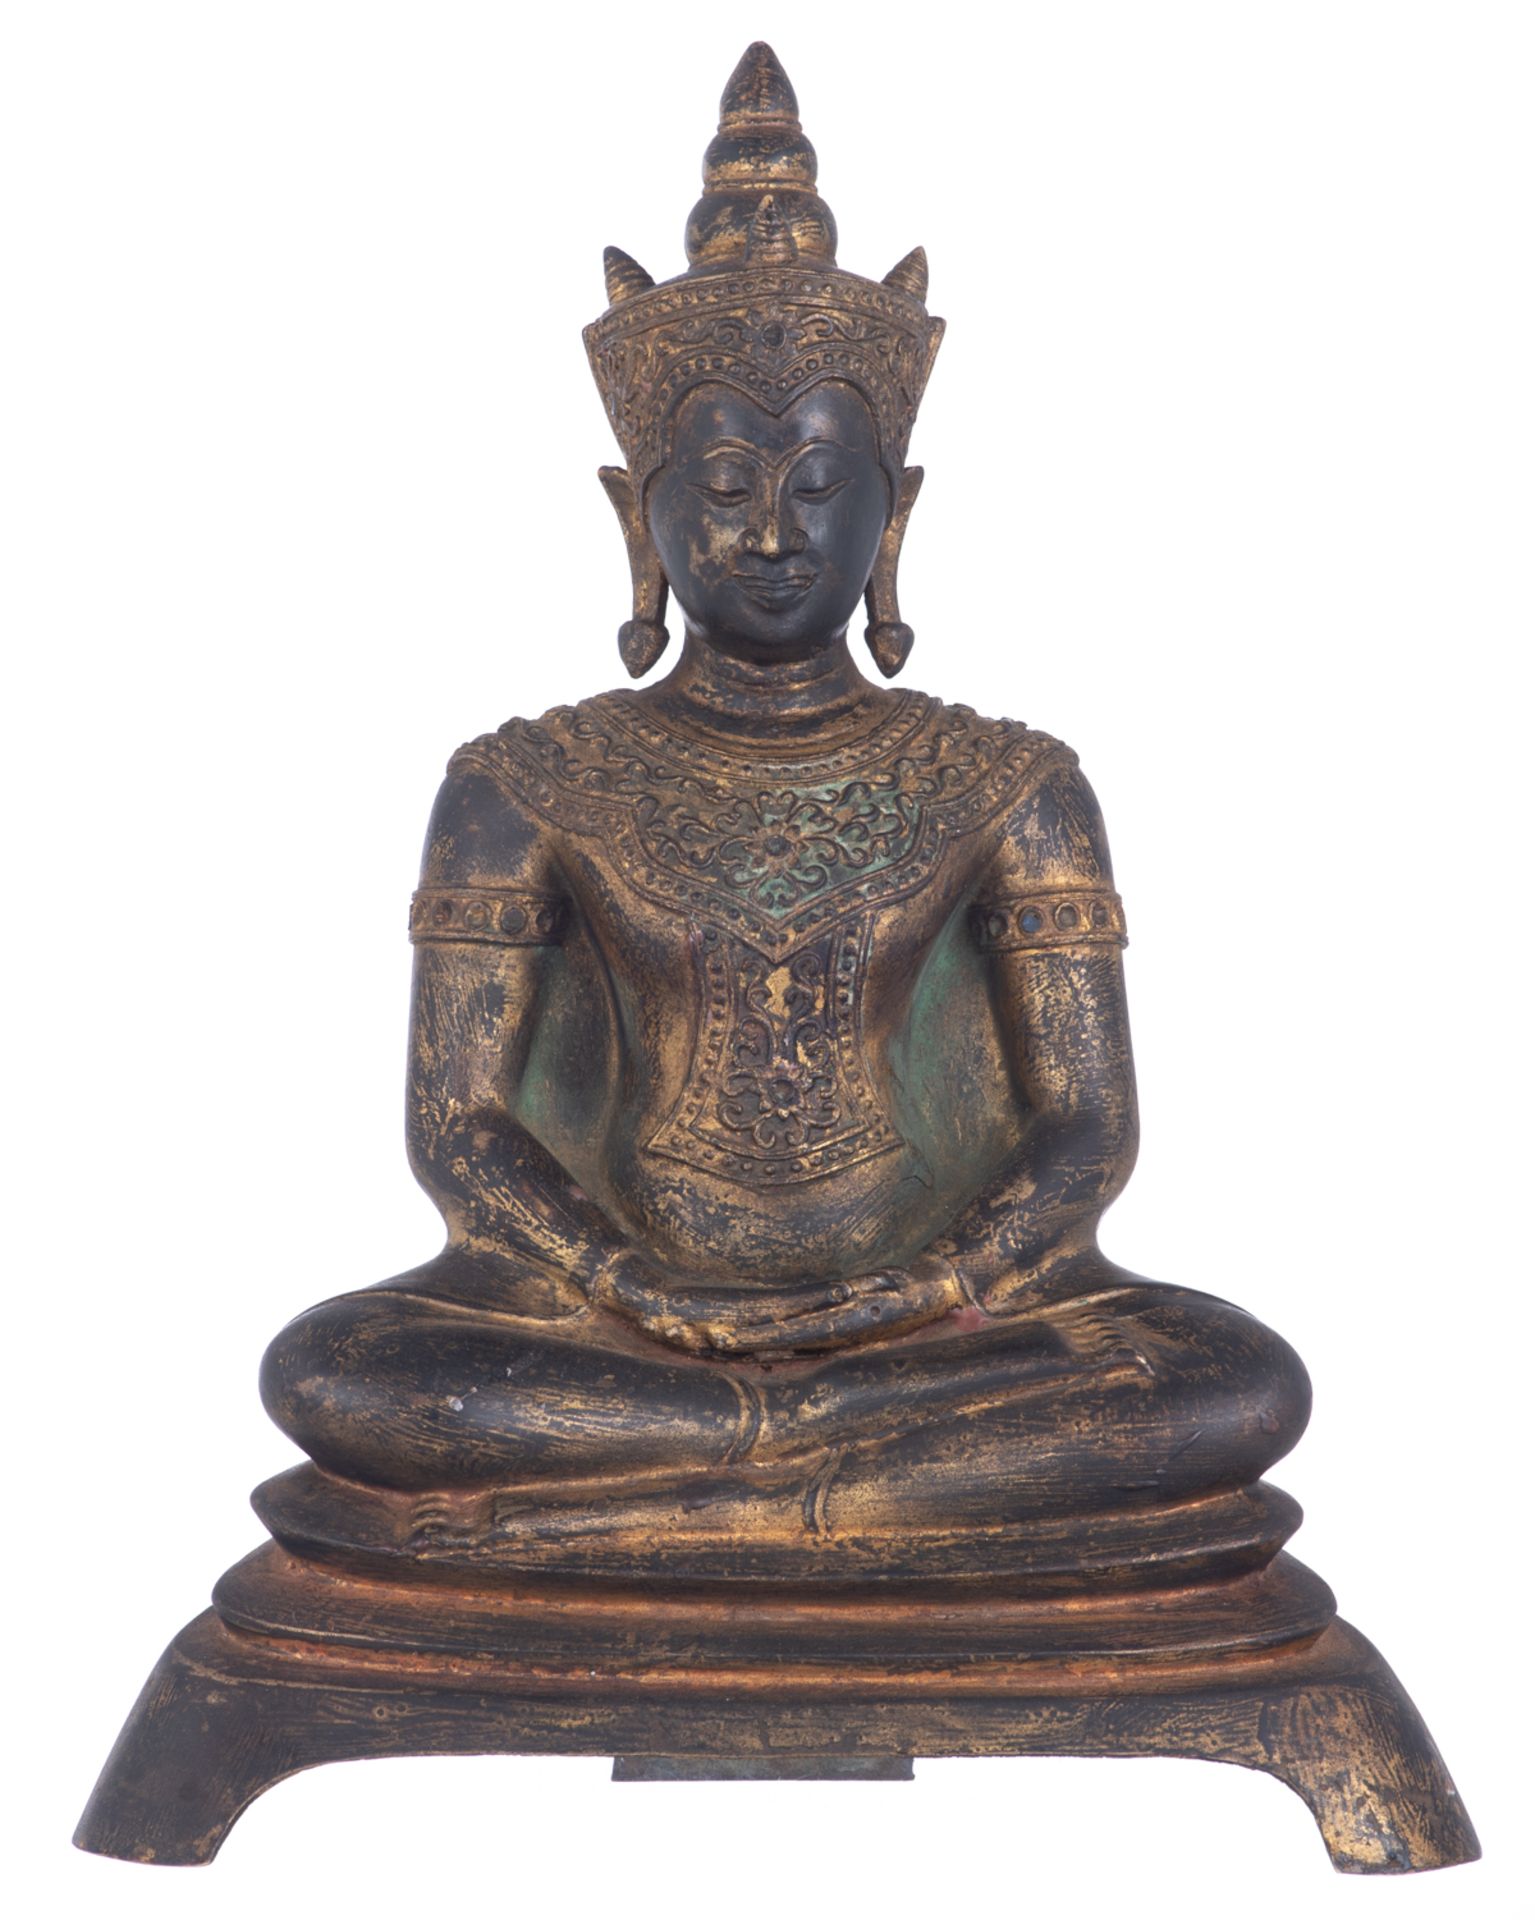 An Oriental gilt bronze seated figure of a Buddha in meditation, with semi-precious stone inlay, H 3